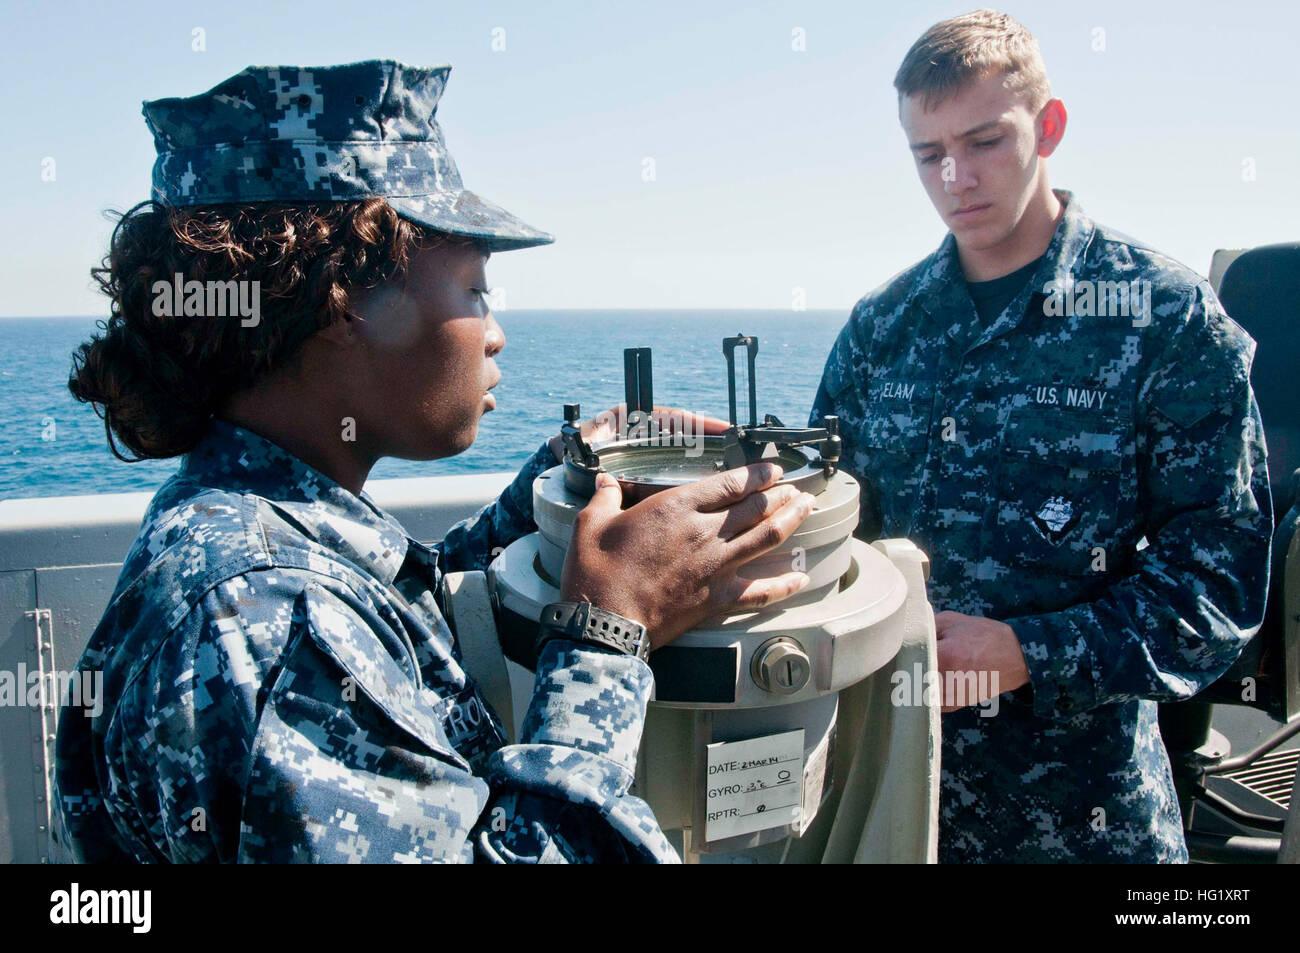 140303-N-YO707-036 ATLANTIC OCEAN (March 3, 2014) Quartermaster Seaman Apprentice Natasha M. Rowell, left,  and Quartermaster Seaman Bryan Elam use an azimuth circle to determine the bearing of the sun aboard the amphibious transport dock ship USS New York (LPD 21). New York is underway conducting a routine training exercise. (U.S. Navy photo by: Mass Communication Specialist 2nd Class Cyrus Roson/Released) USS New York operations 140303-N-YO707-036 Stock Photo